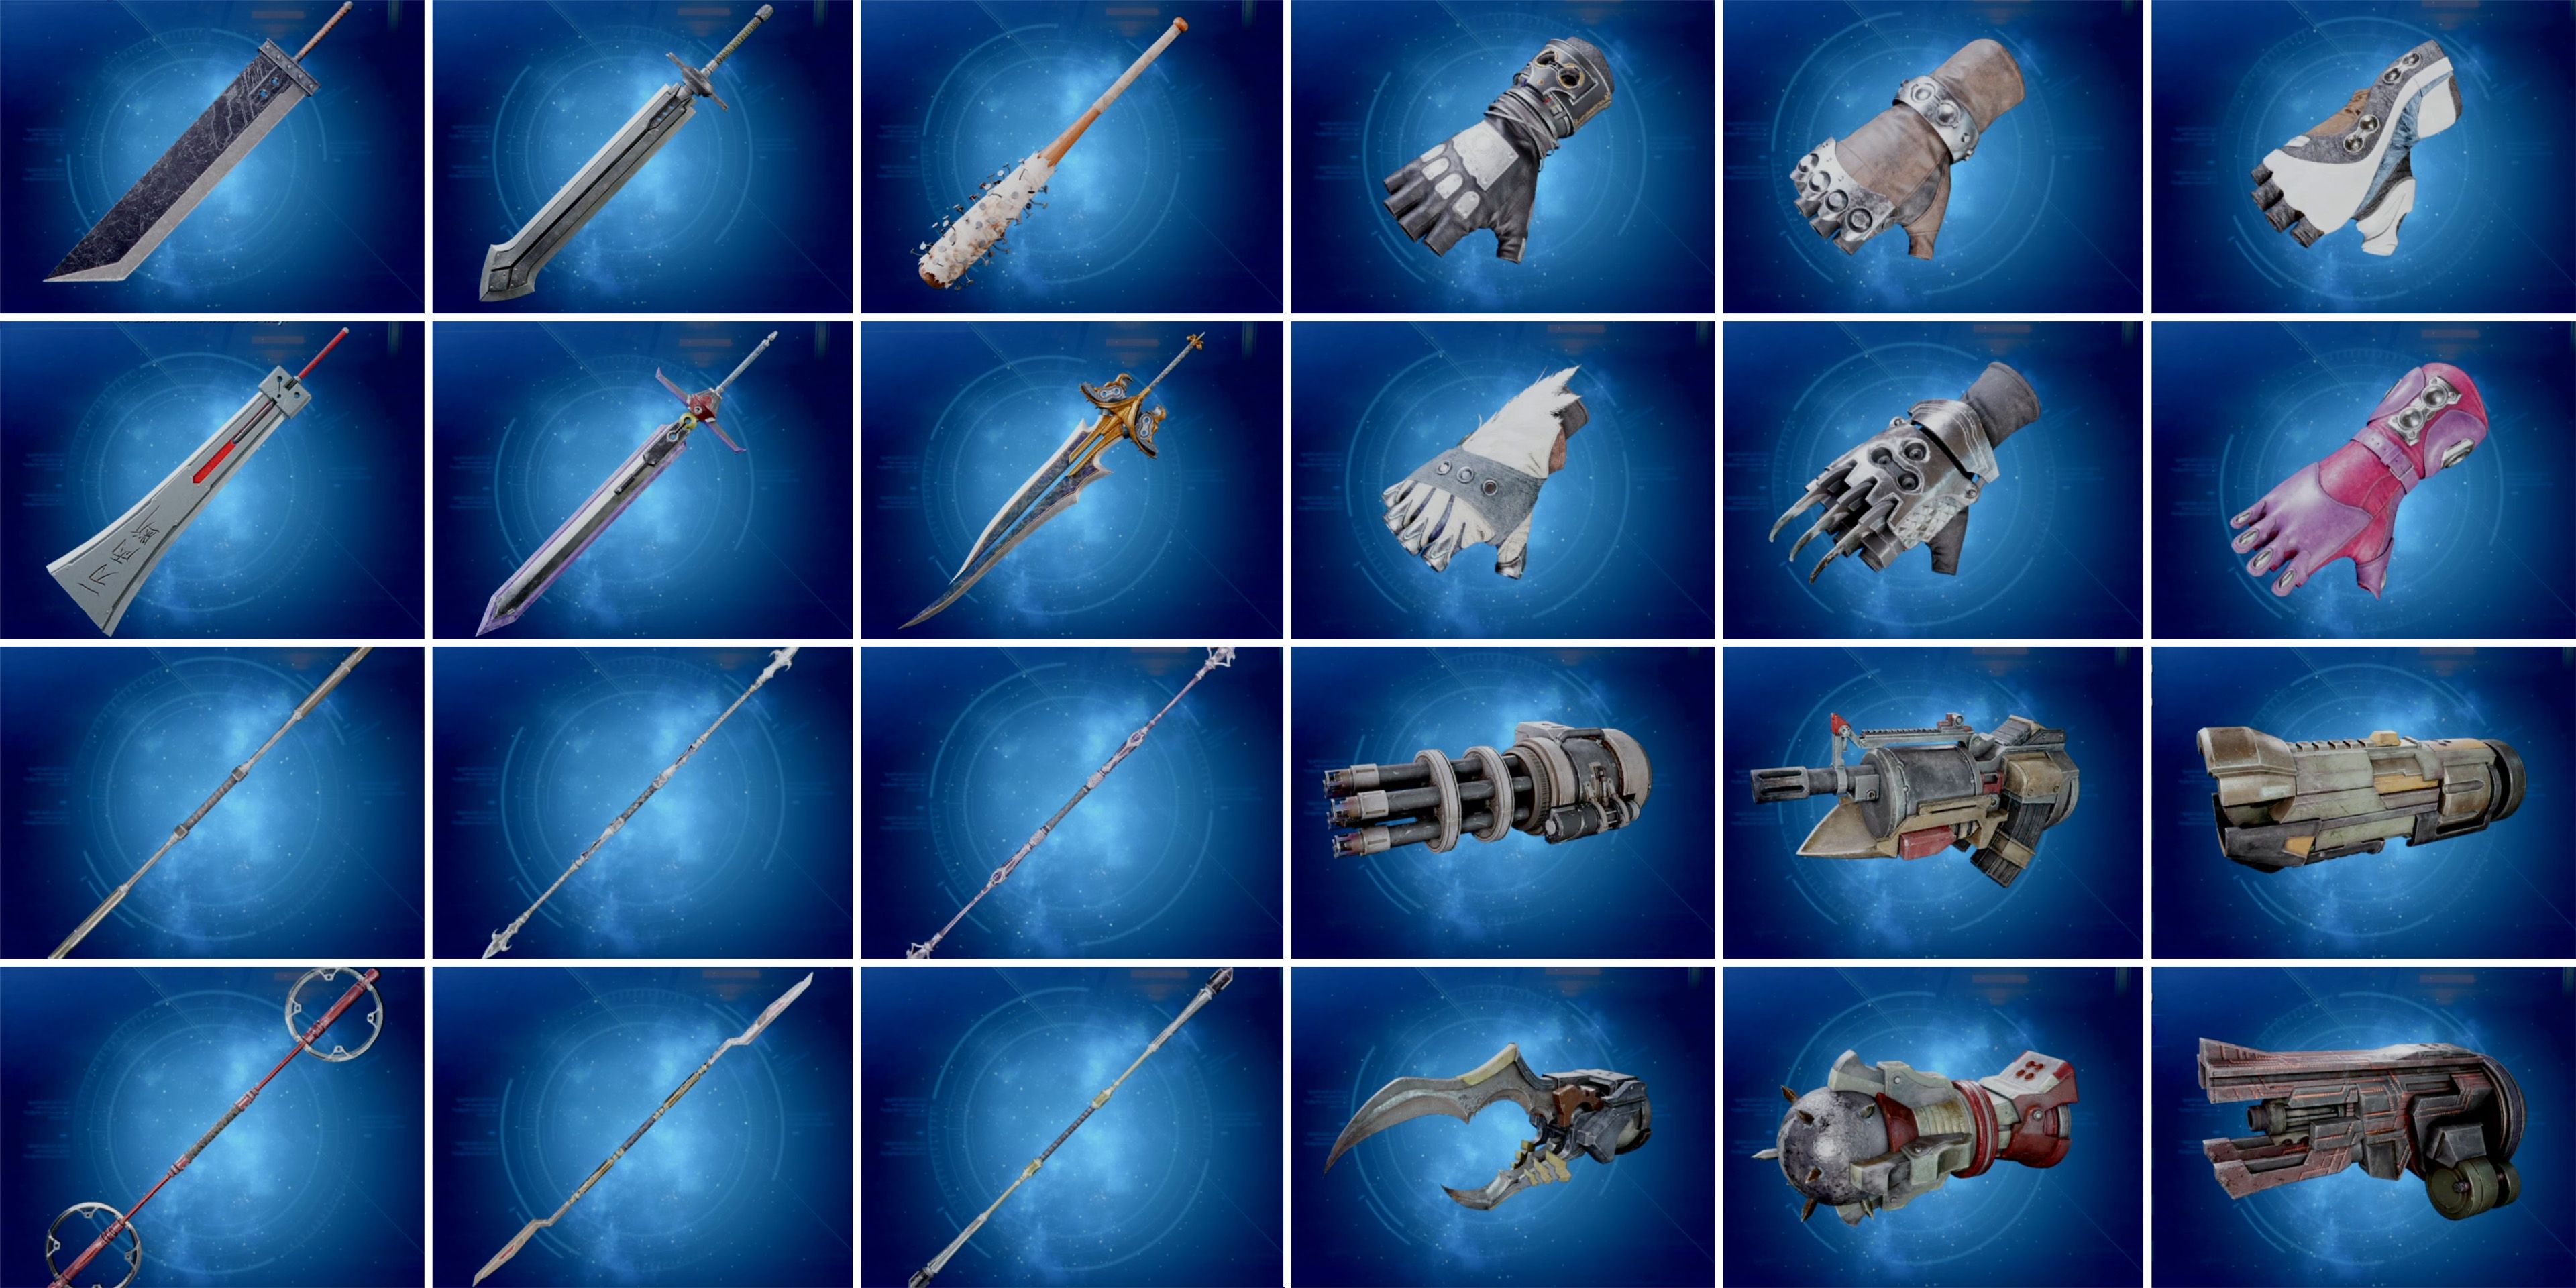 Final Fantasy VII Remake Every Weapon In The Game (& Where To Find Them)